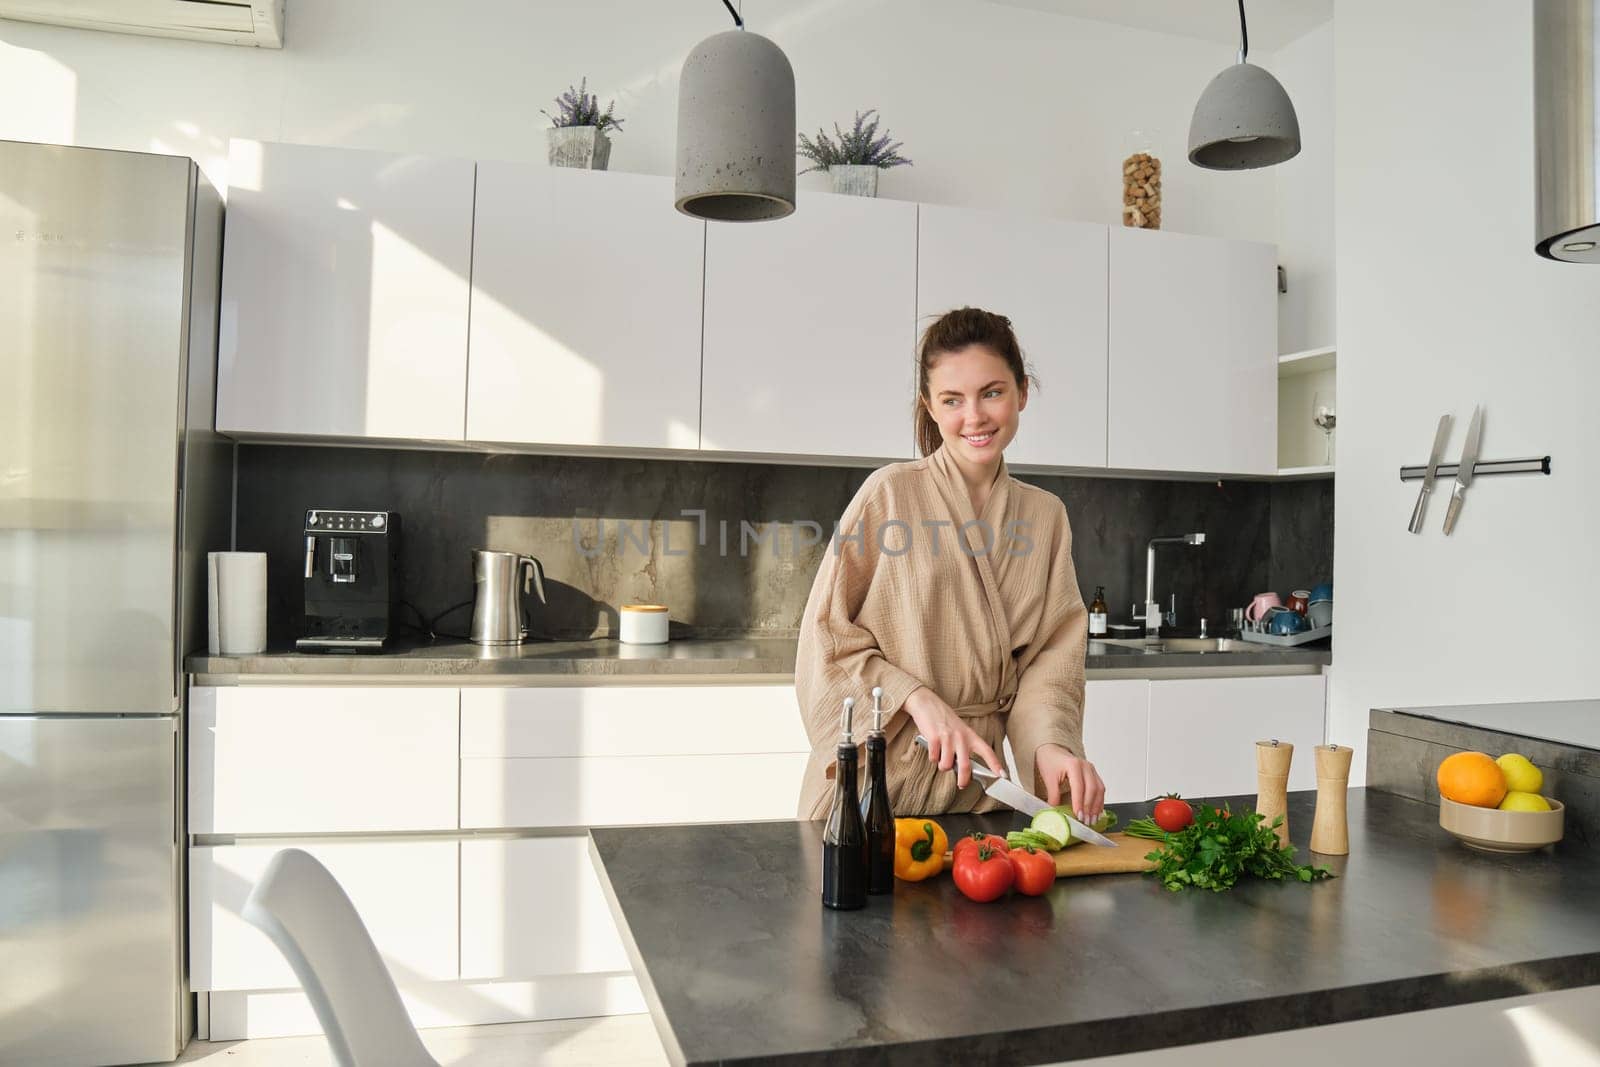 Portrait of good-looking woman cooking salad in the kitchen, chopping vegetables and smiling, preparing healthy meal, leading healthy lifestyle and eating raw food.